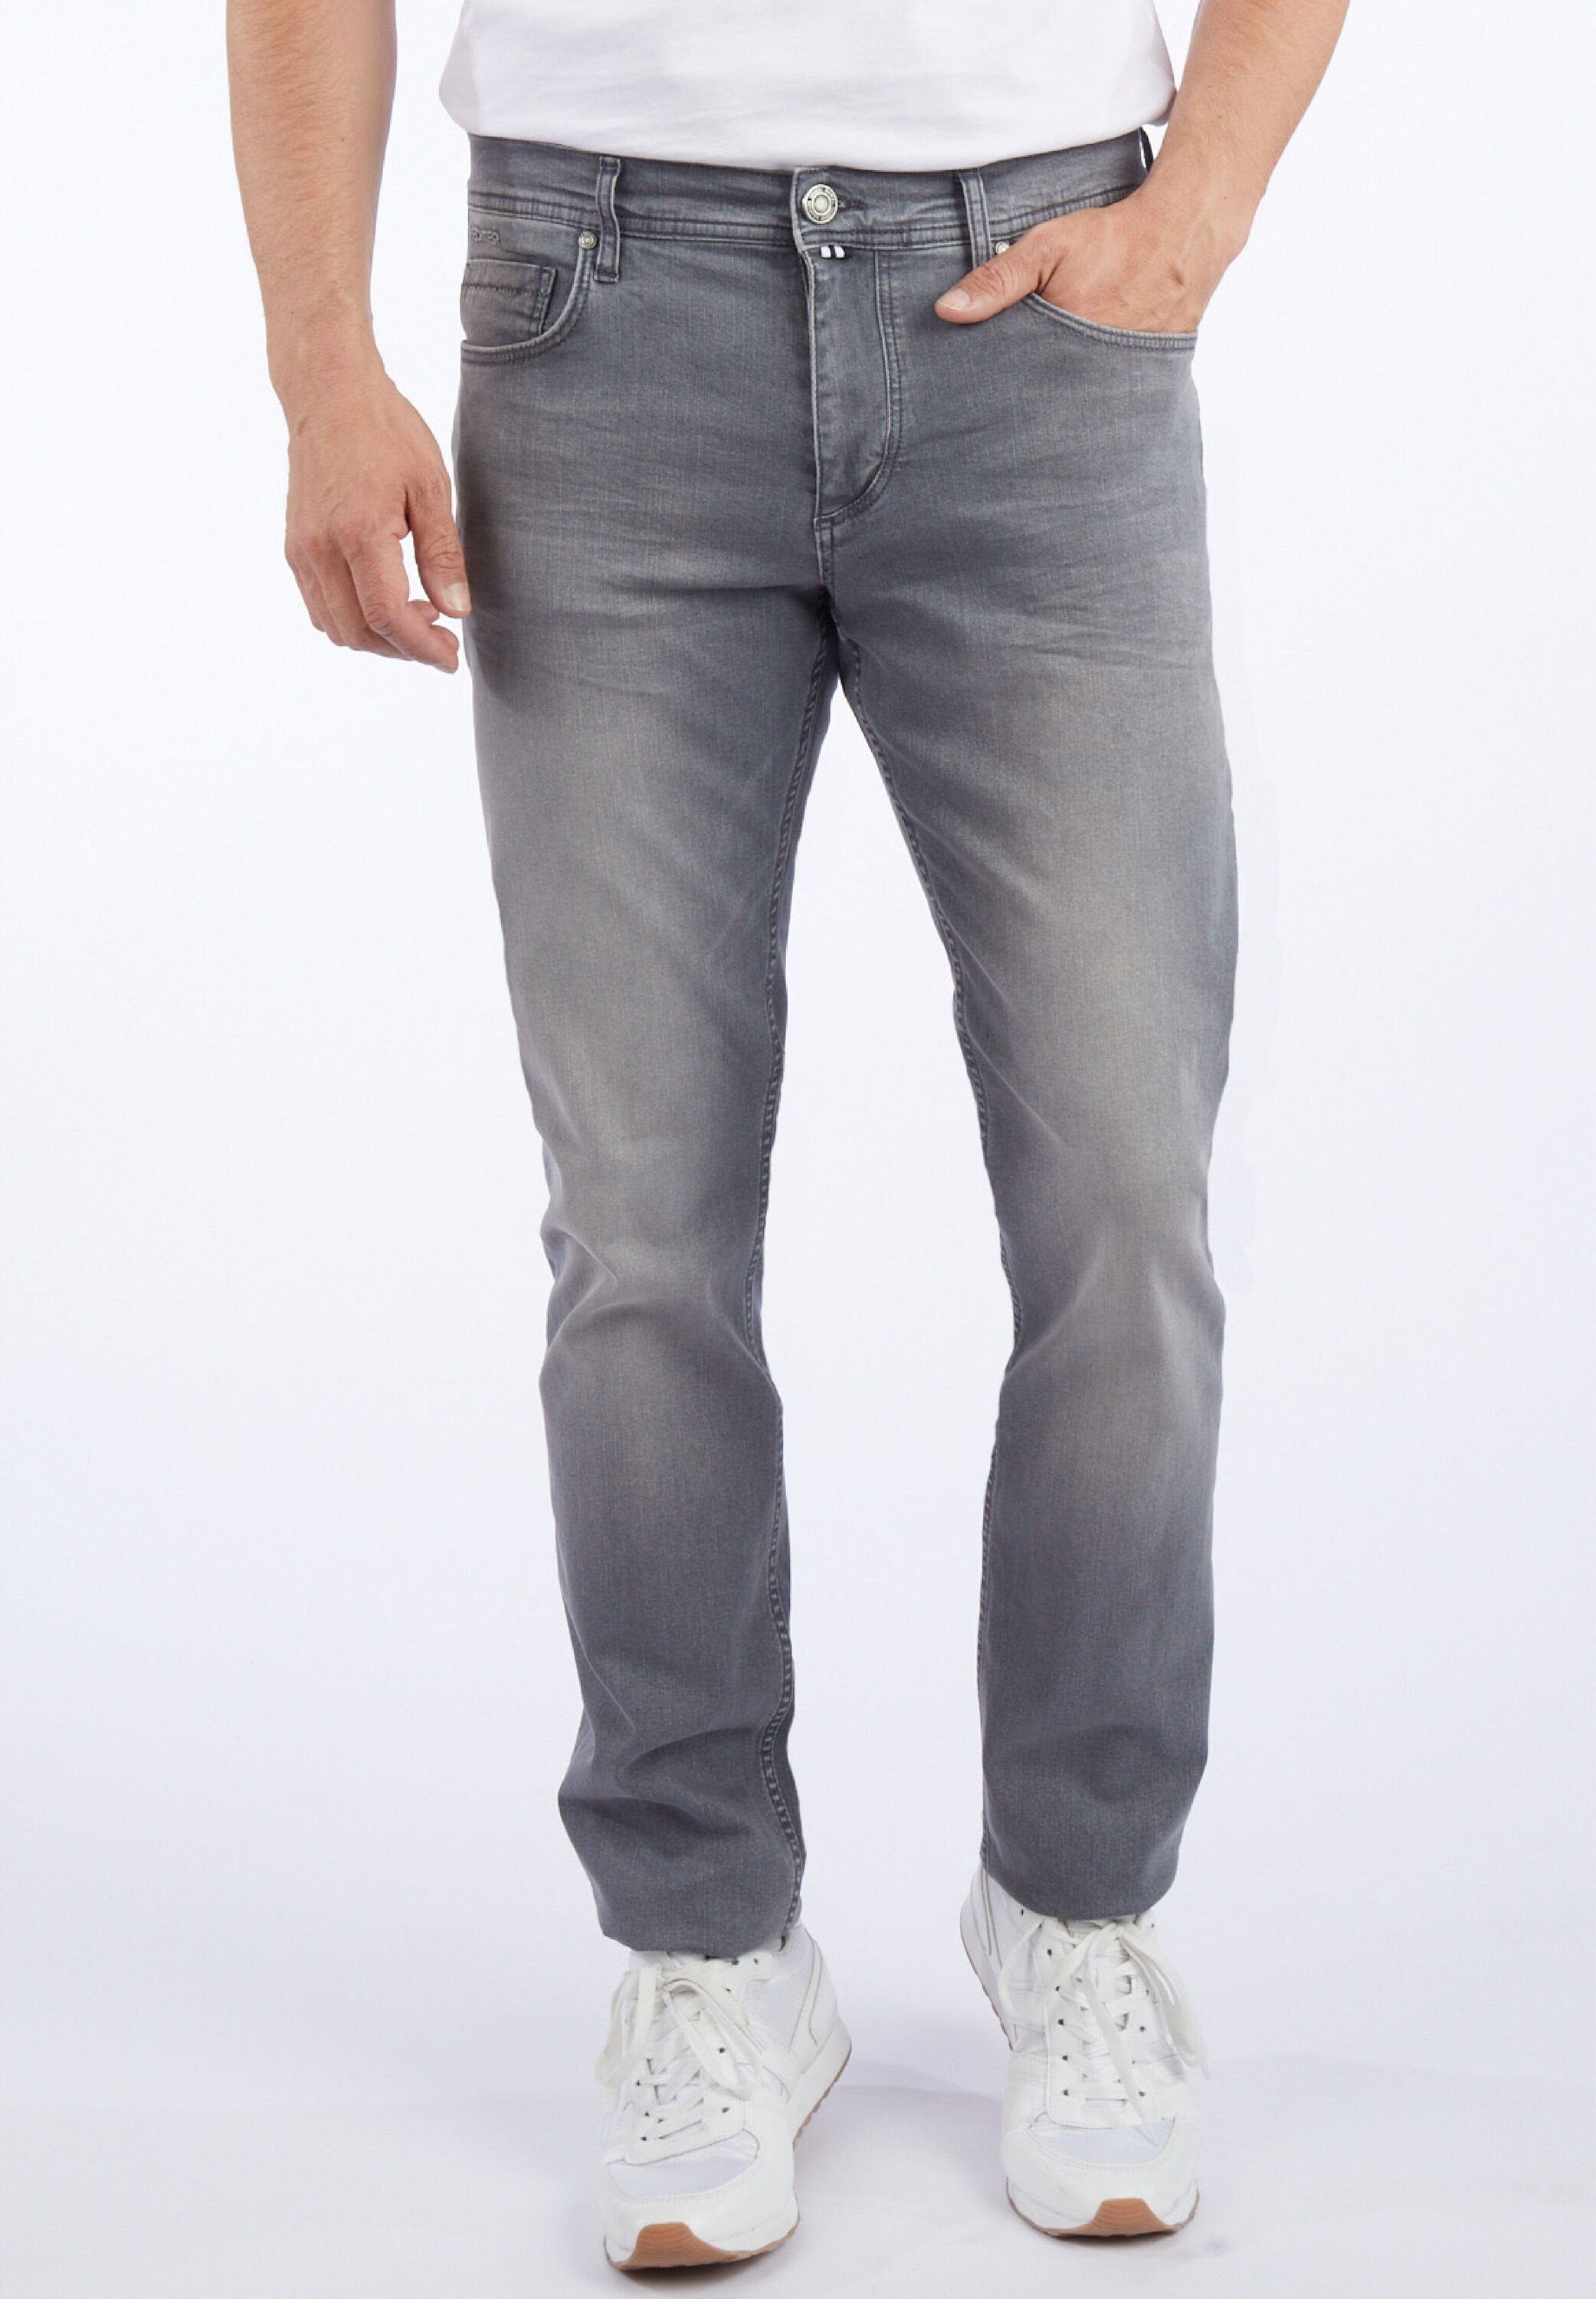 PARIS im Stone-Washed-Look HECHTER Straight-Jeans